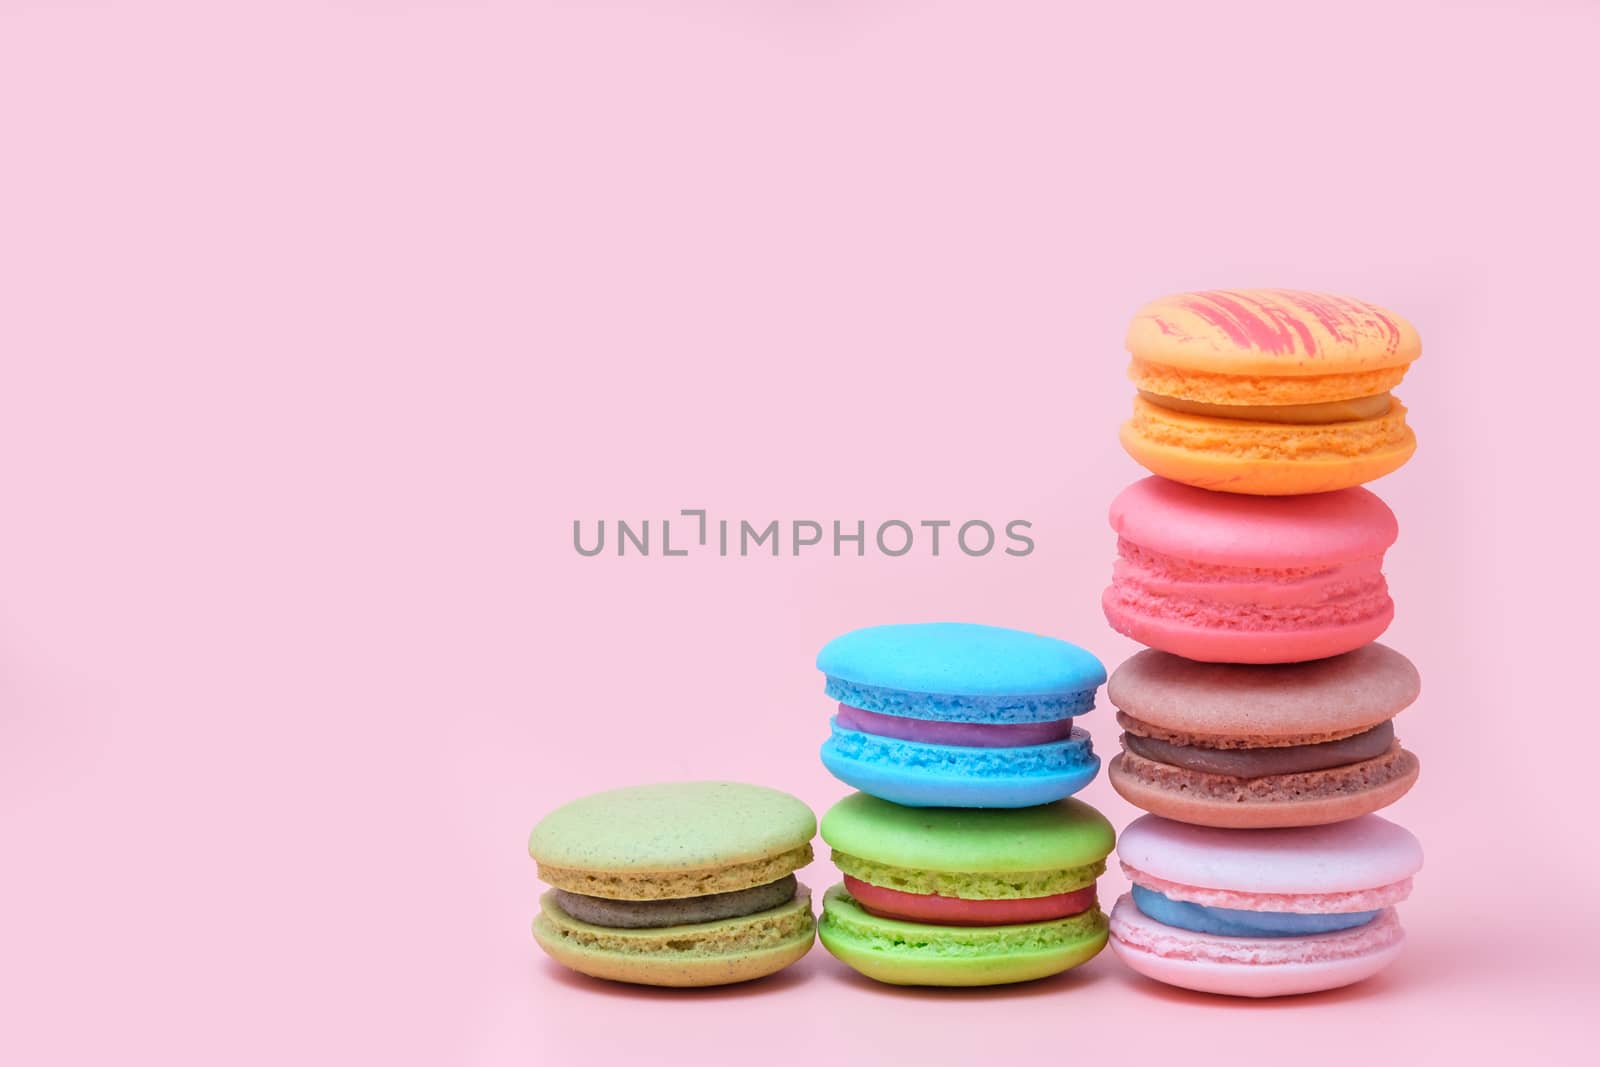 Sweet and colourful french macaroons by zneb076